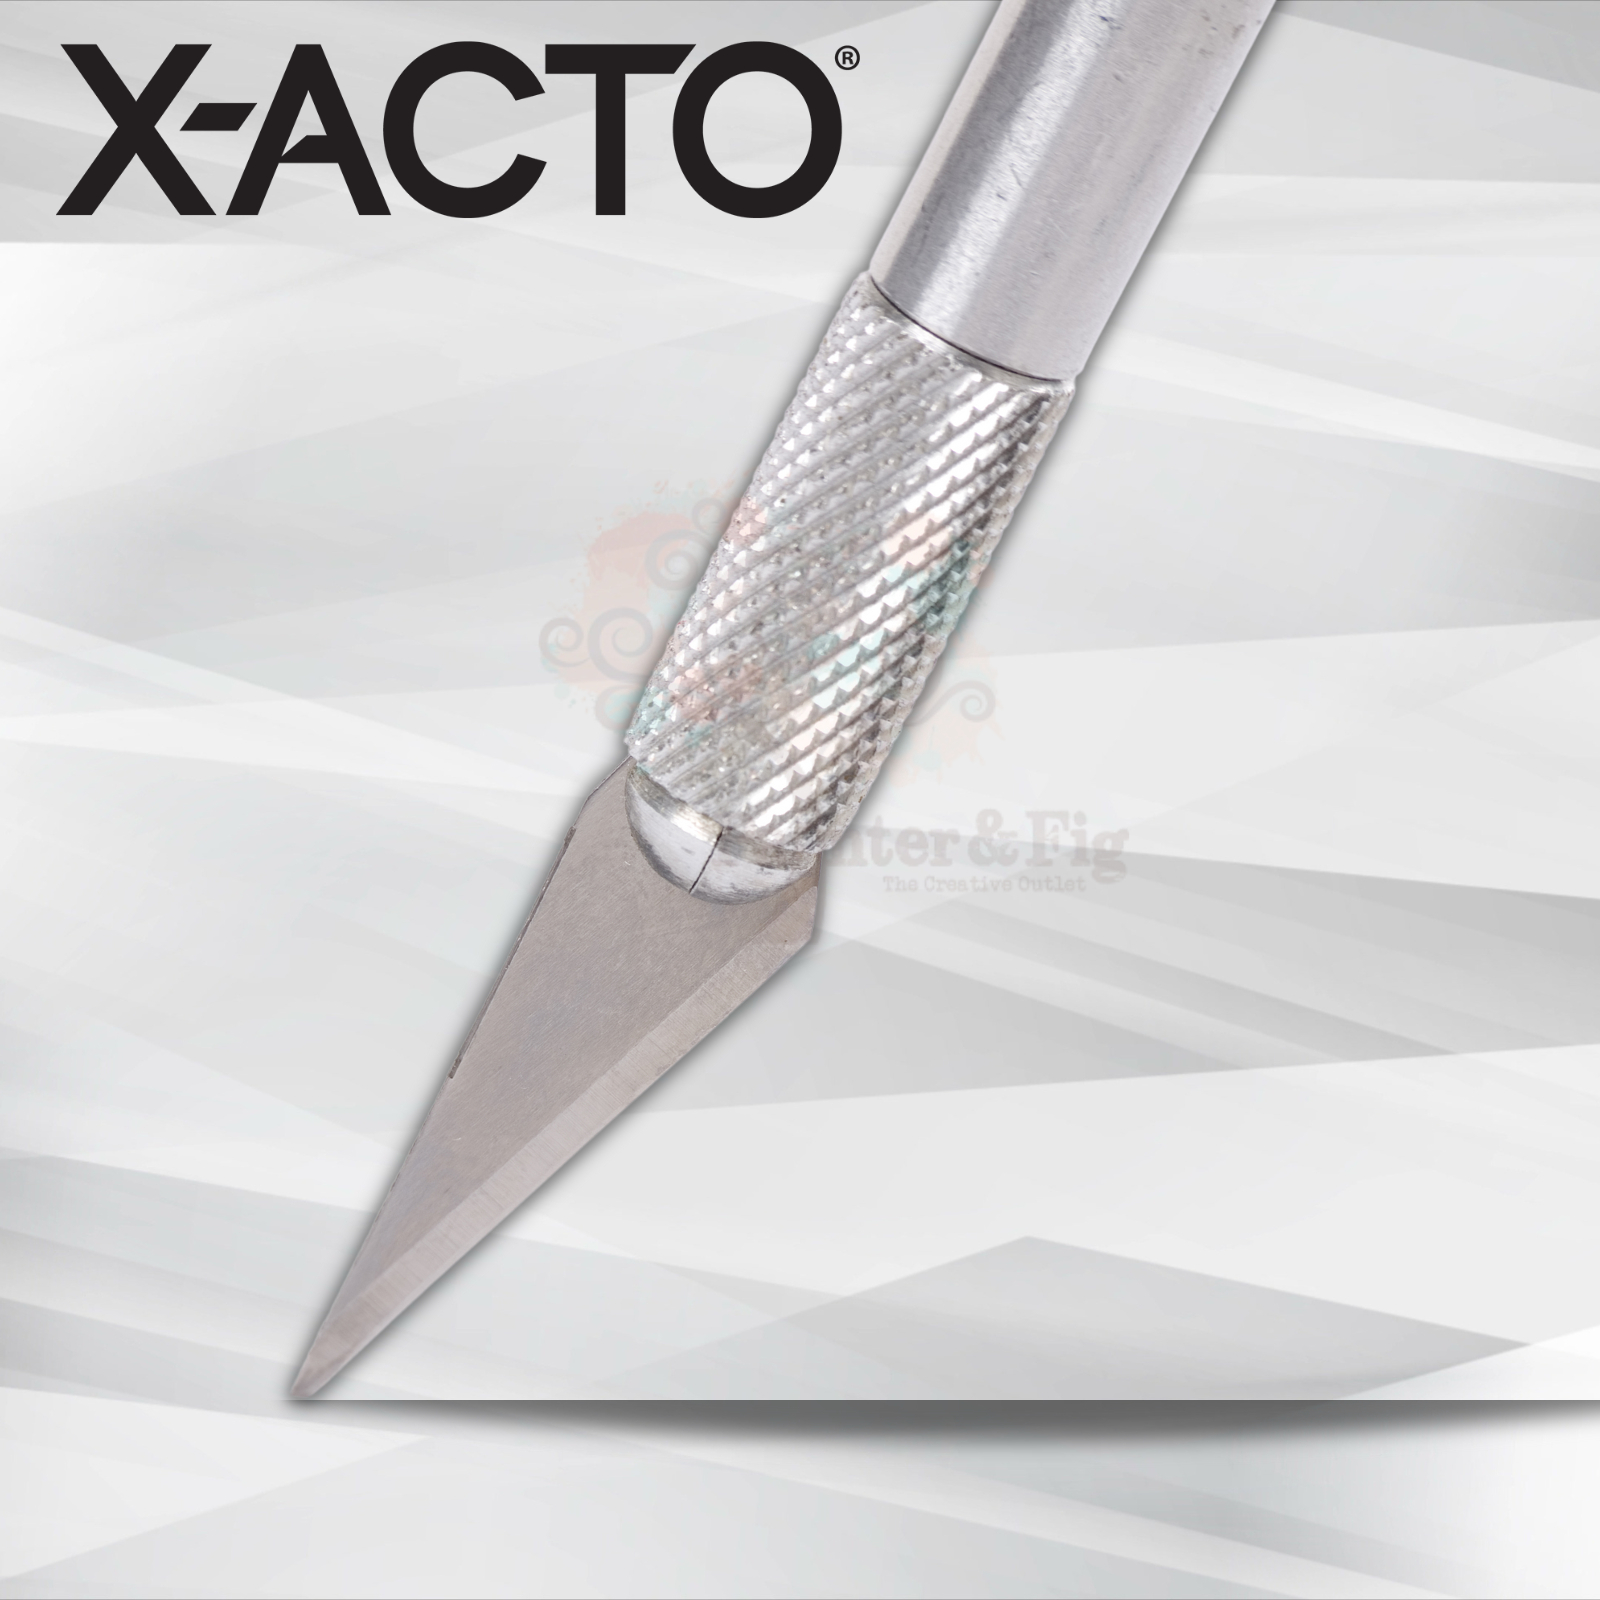 X-Acto Craft Knife Set, Precision Knife, Cutting, Tool, Trimming - the blades are super sharp and easy to use